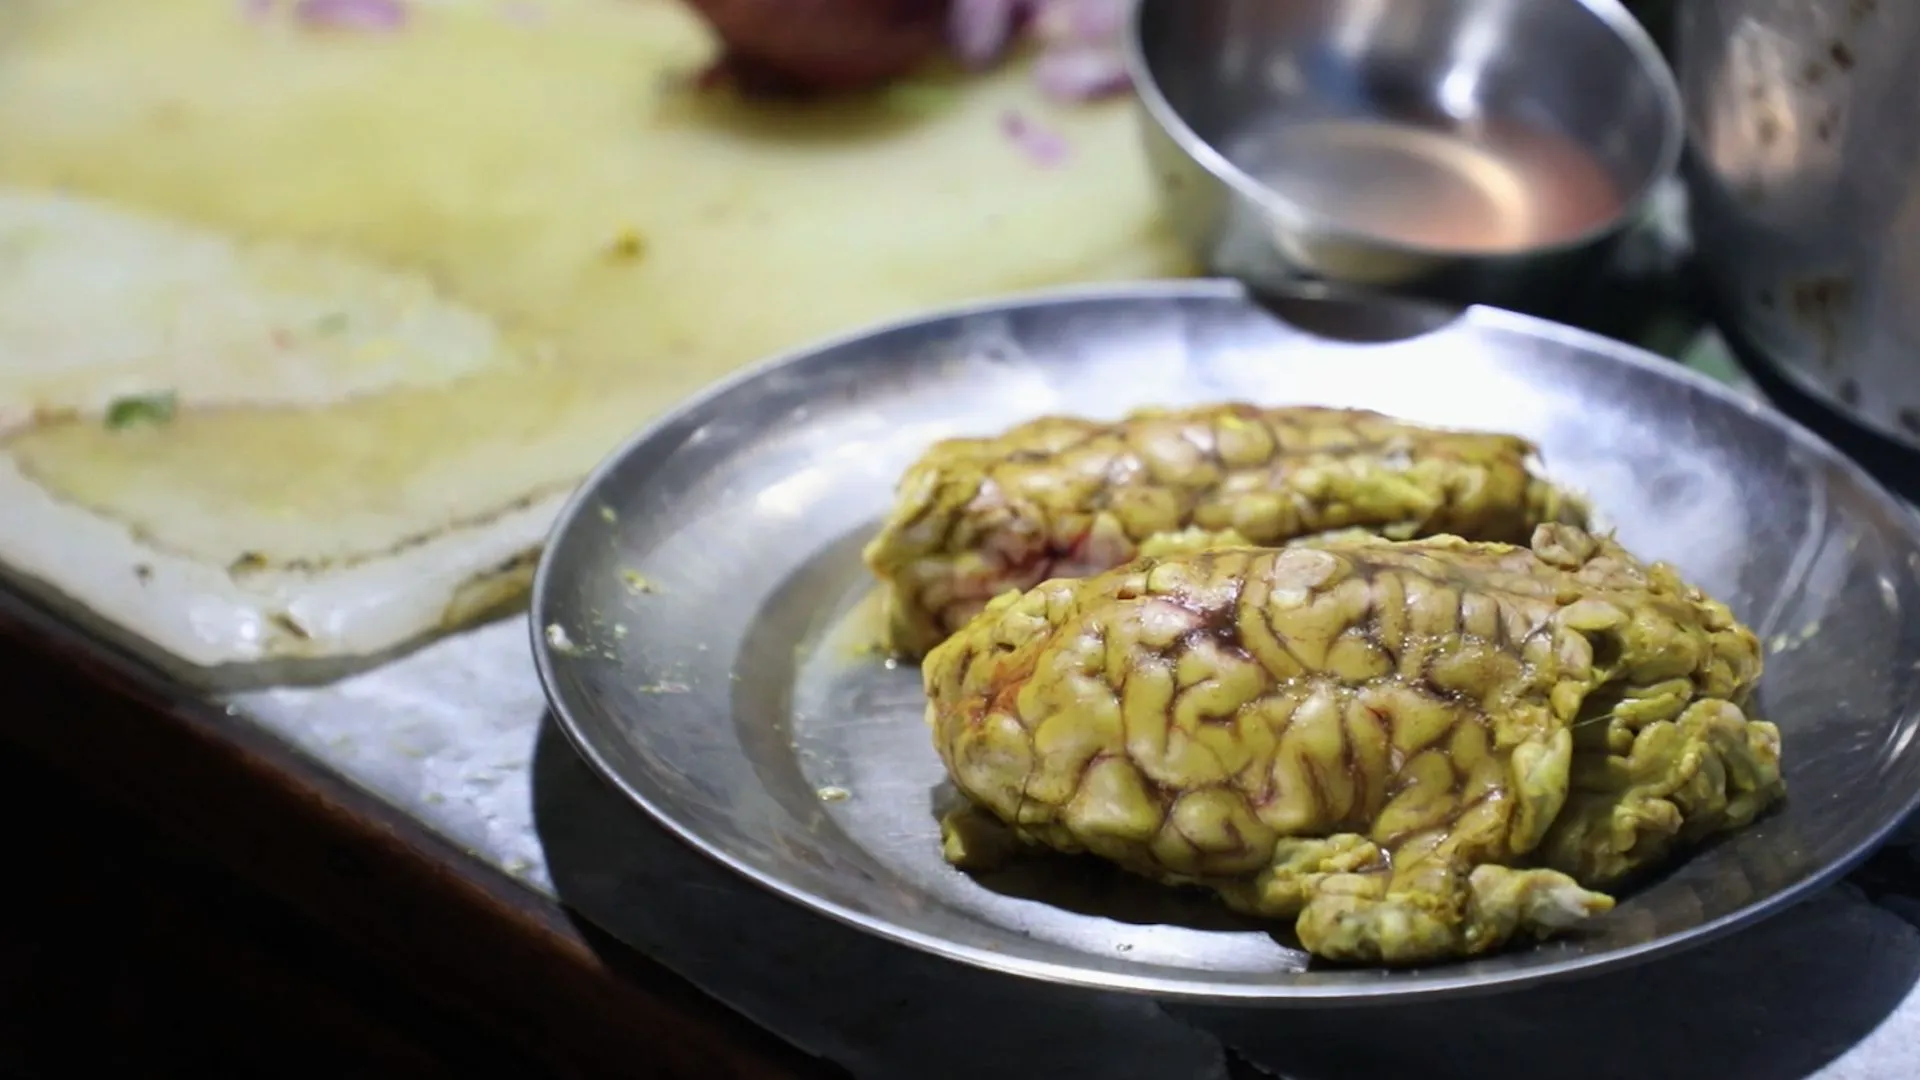 Brain food from the kitchen of the Nepalese Newar